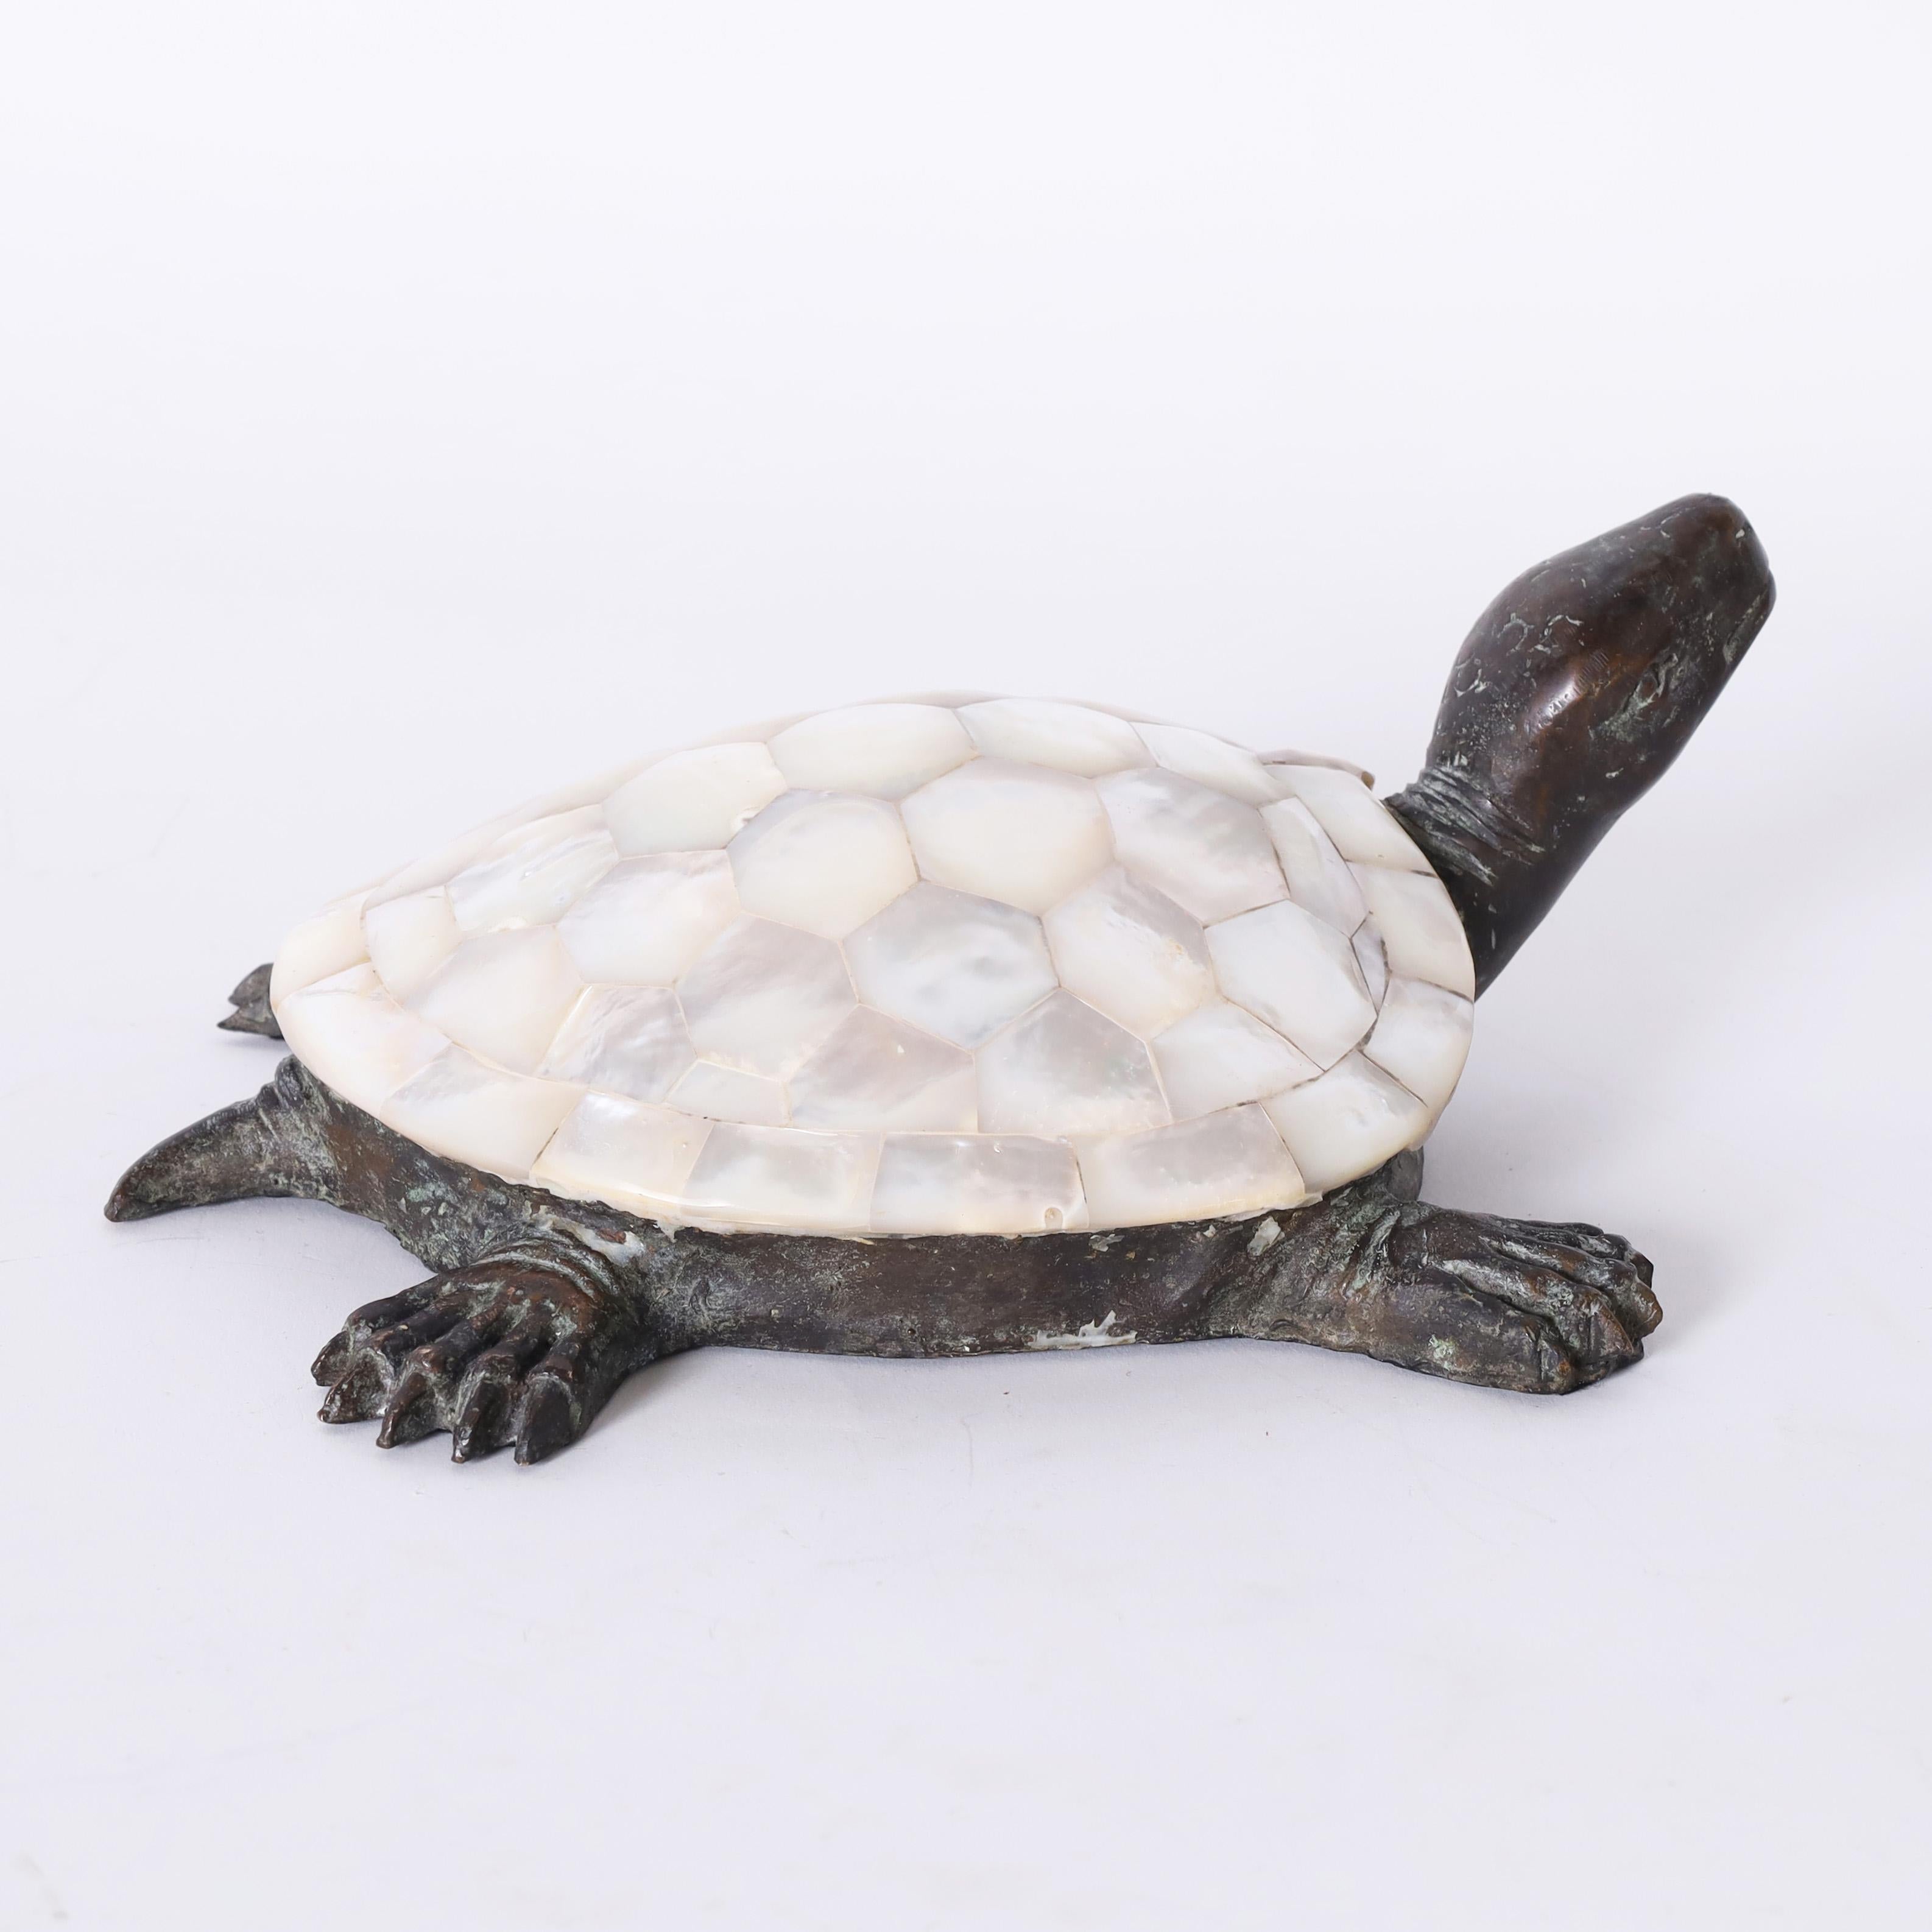 Charming vintage turtle sculpture or object of art crafted in bronze with a mother of pearl shell. Signed Maitland-Smith on the bottom. 